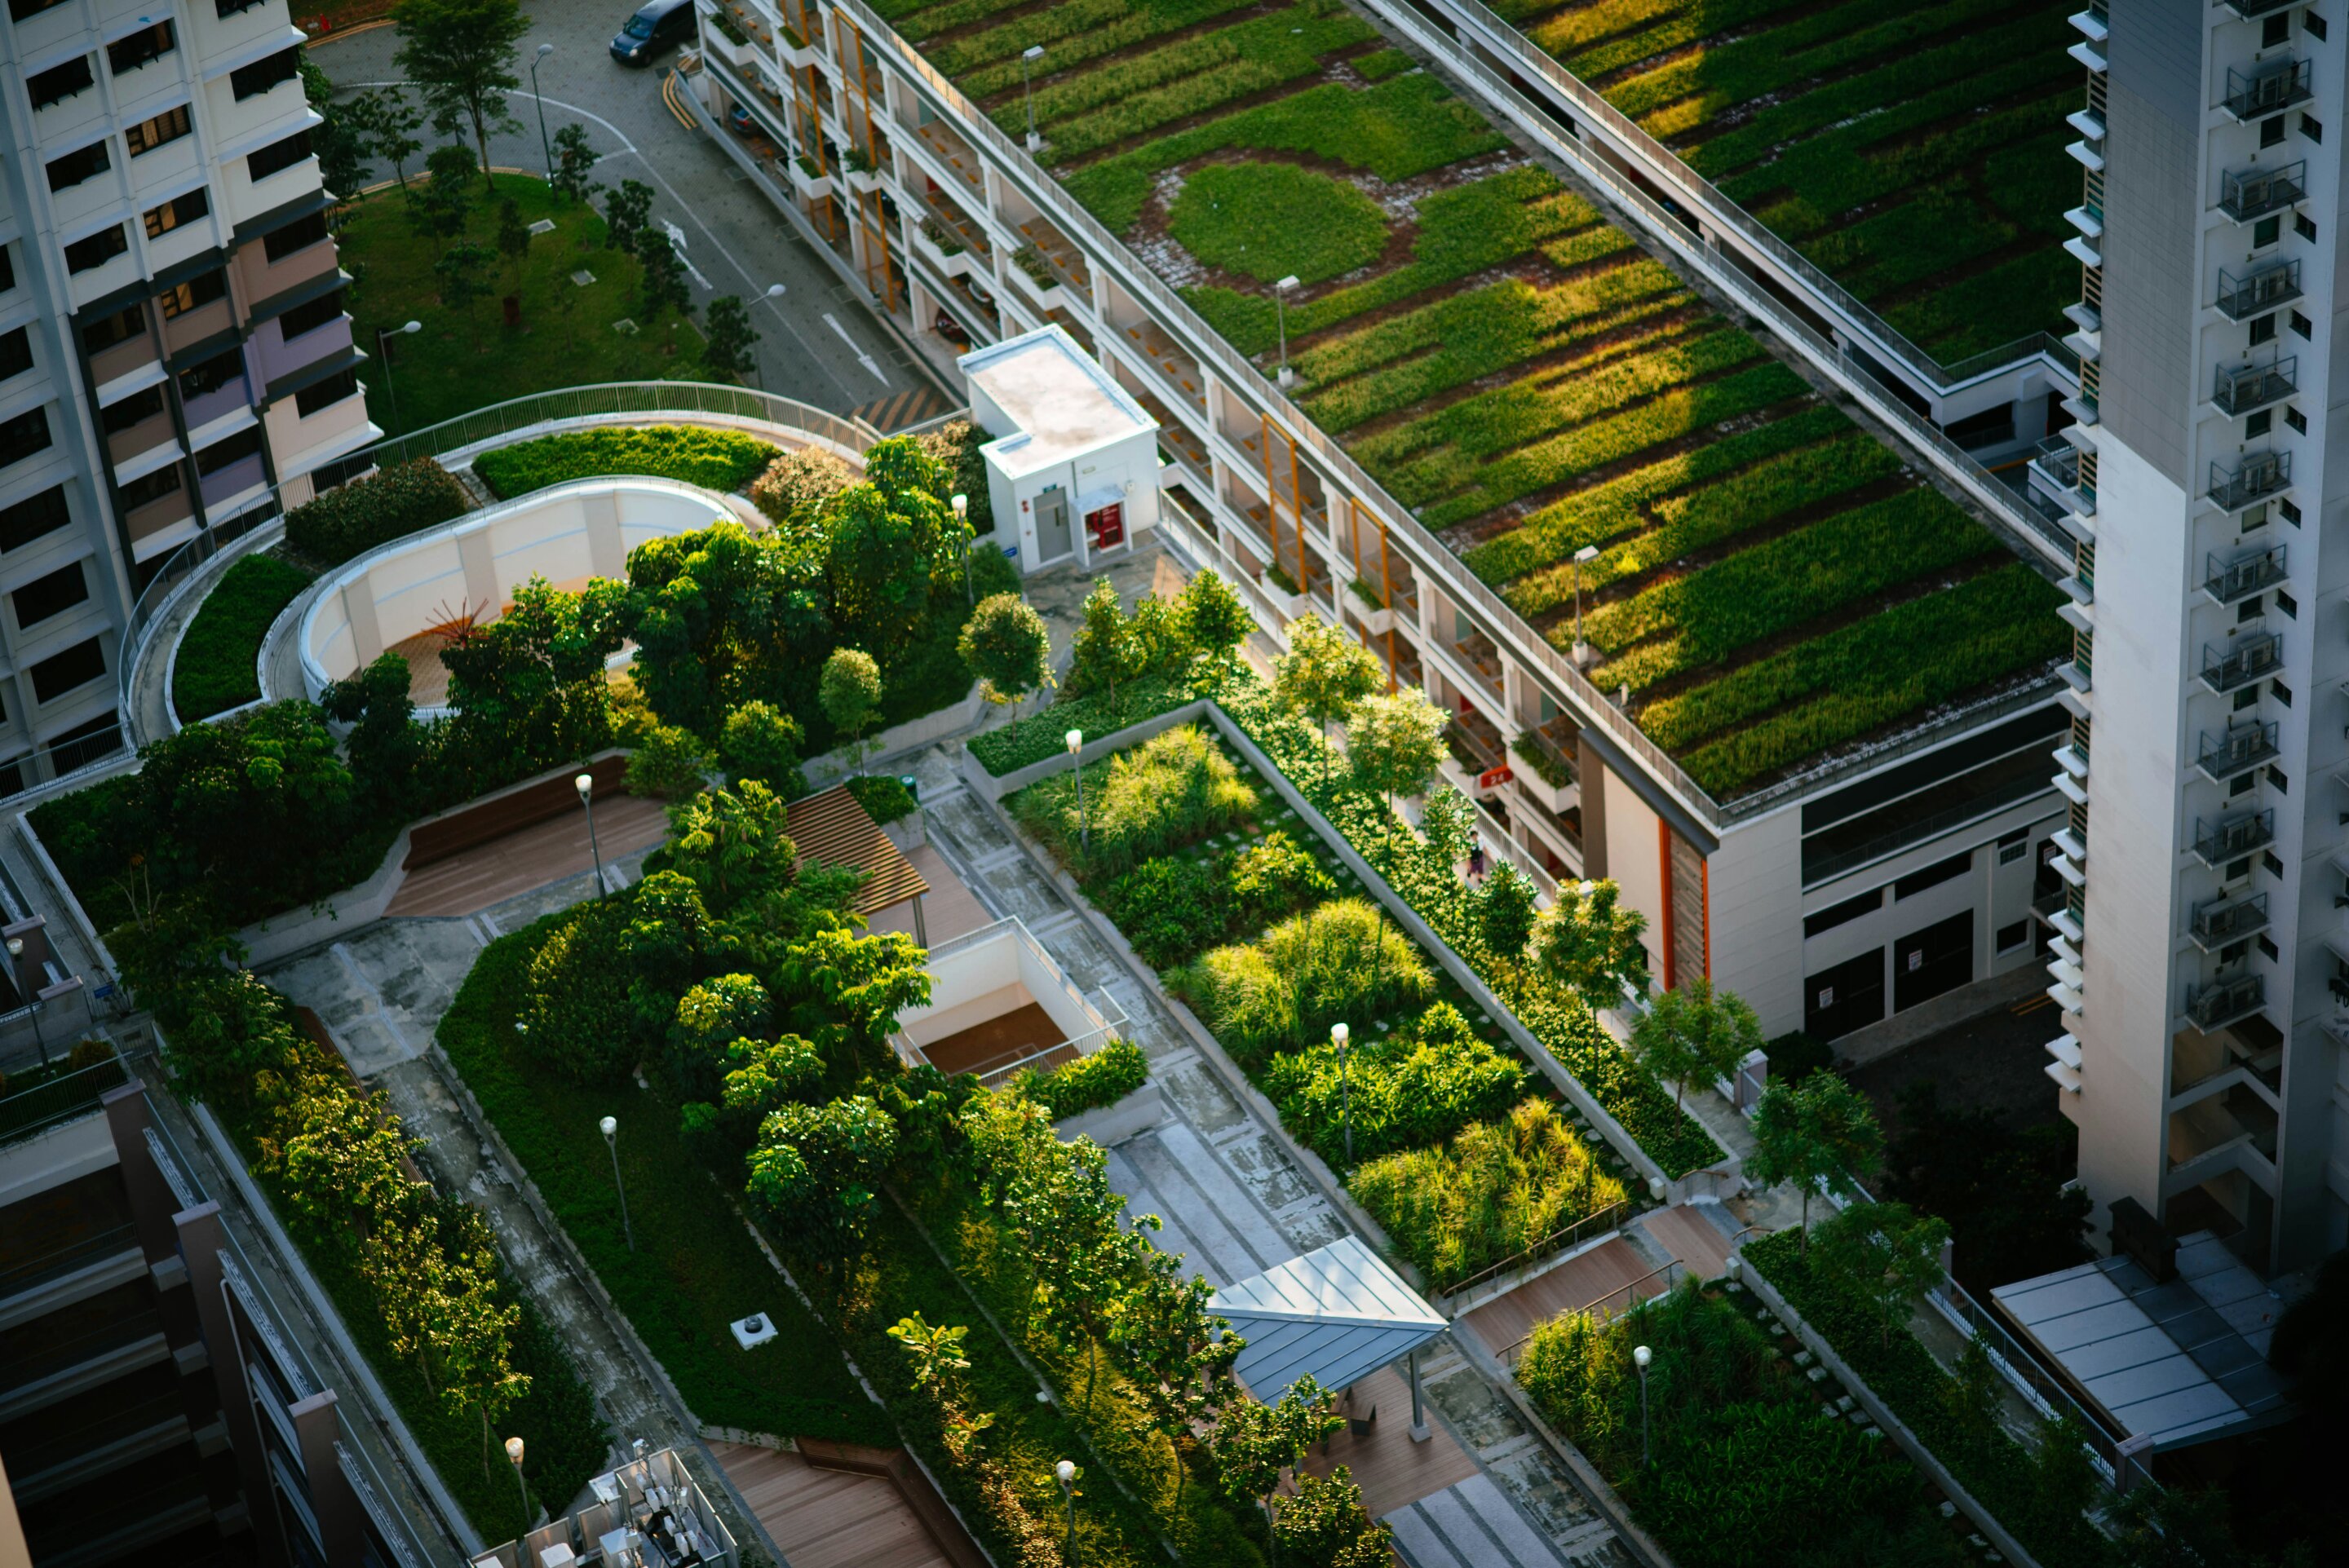 #Modeling shows green roofs can cool cities and save energy